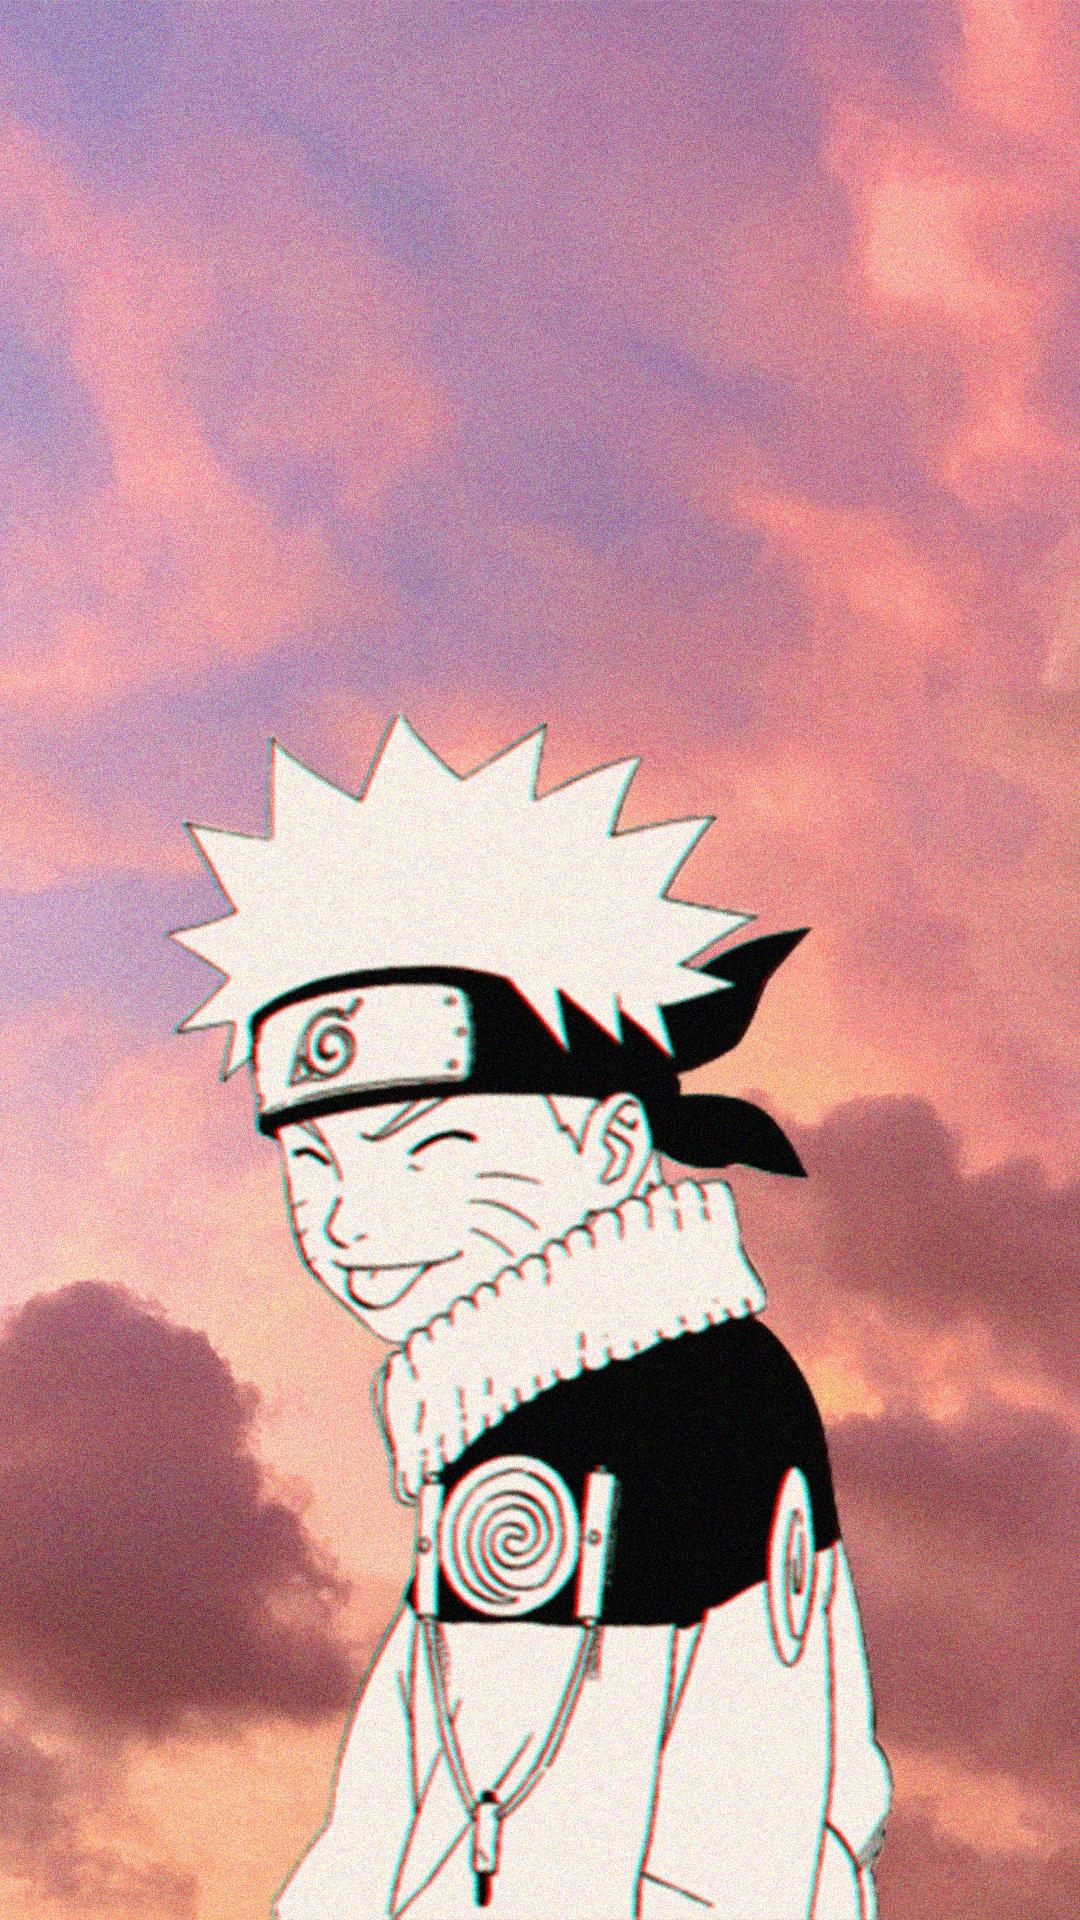 Top 999+ Naruto Aesthetic Wallpaper Full HD, 4K✓Free to Use